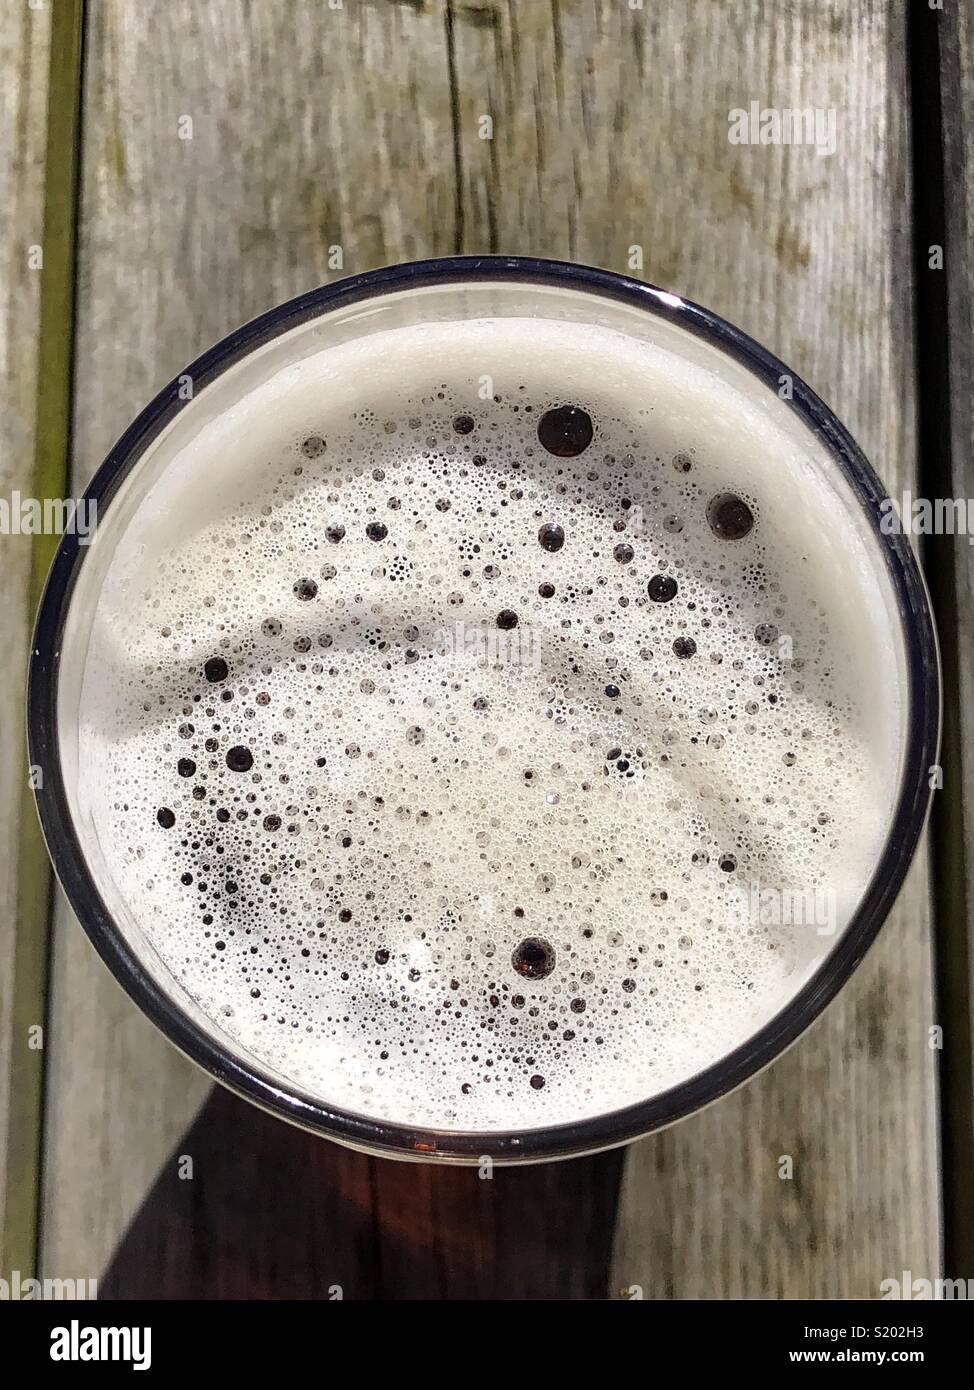 Overhead capture of a pint of ale beer on a wooden bench Stock Photo